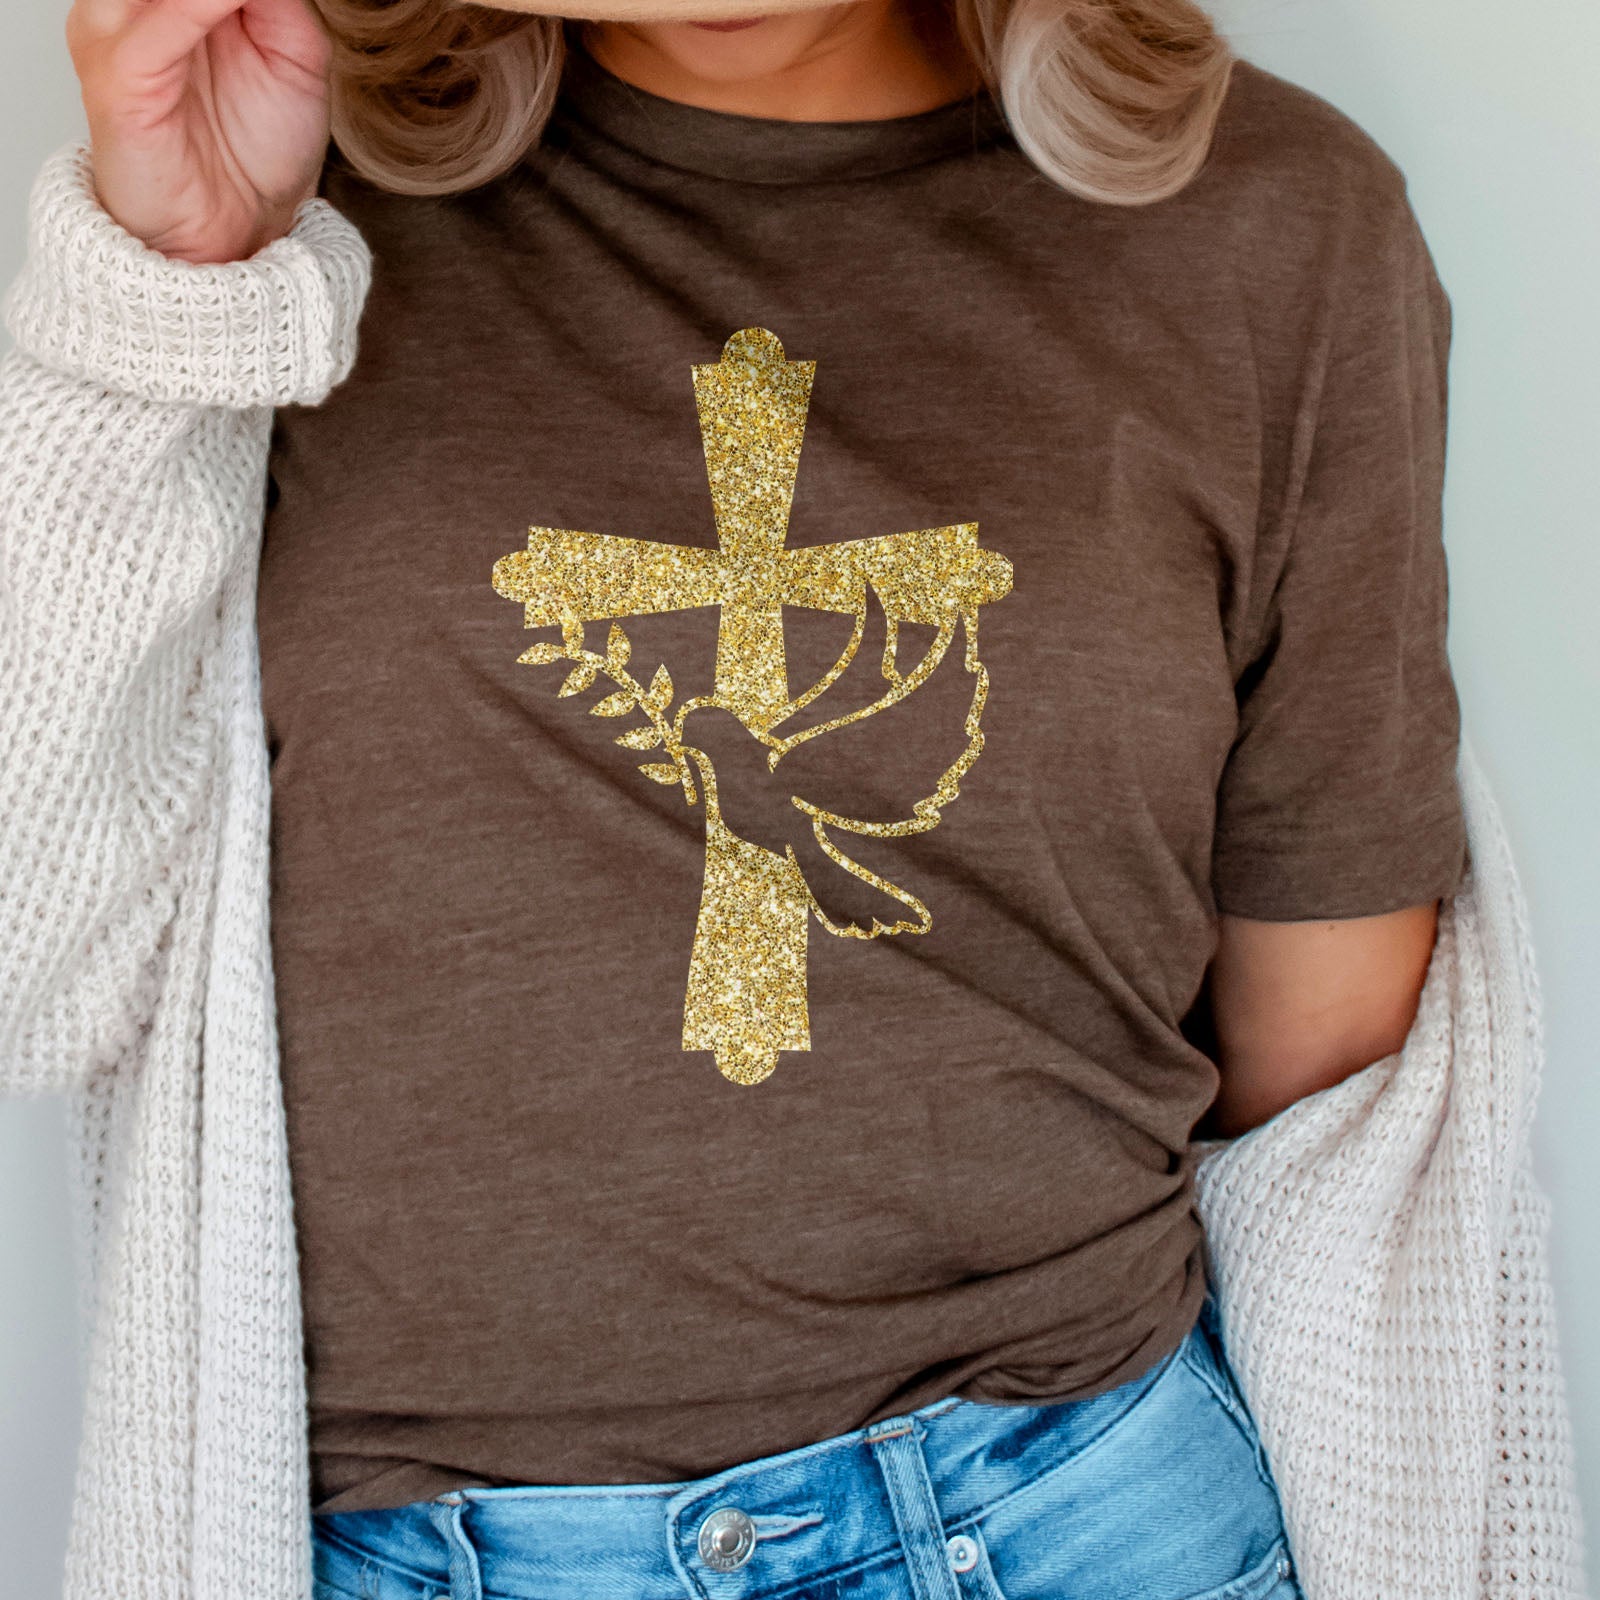 Dove of Peace Tee Shirts For Women - Christian Shirts for Women - Religious Tee Shirts